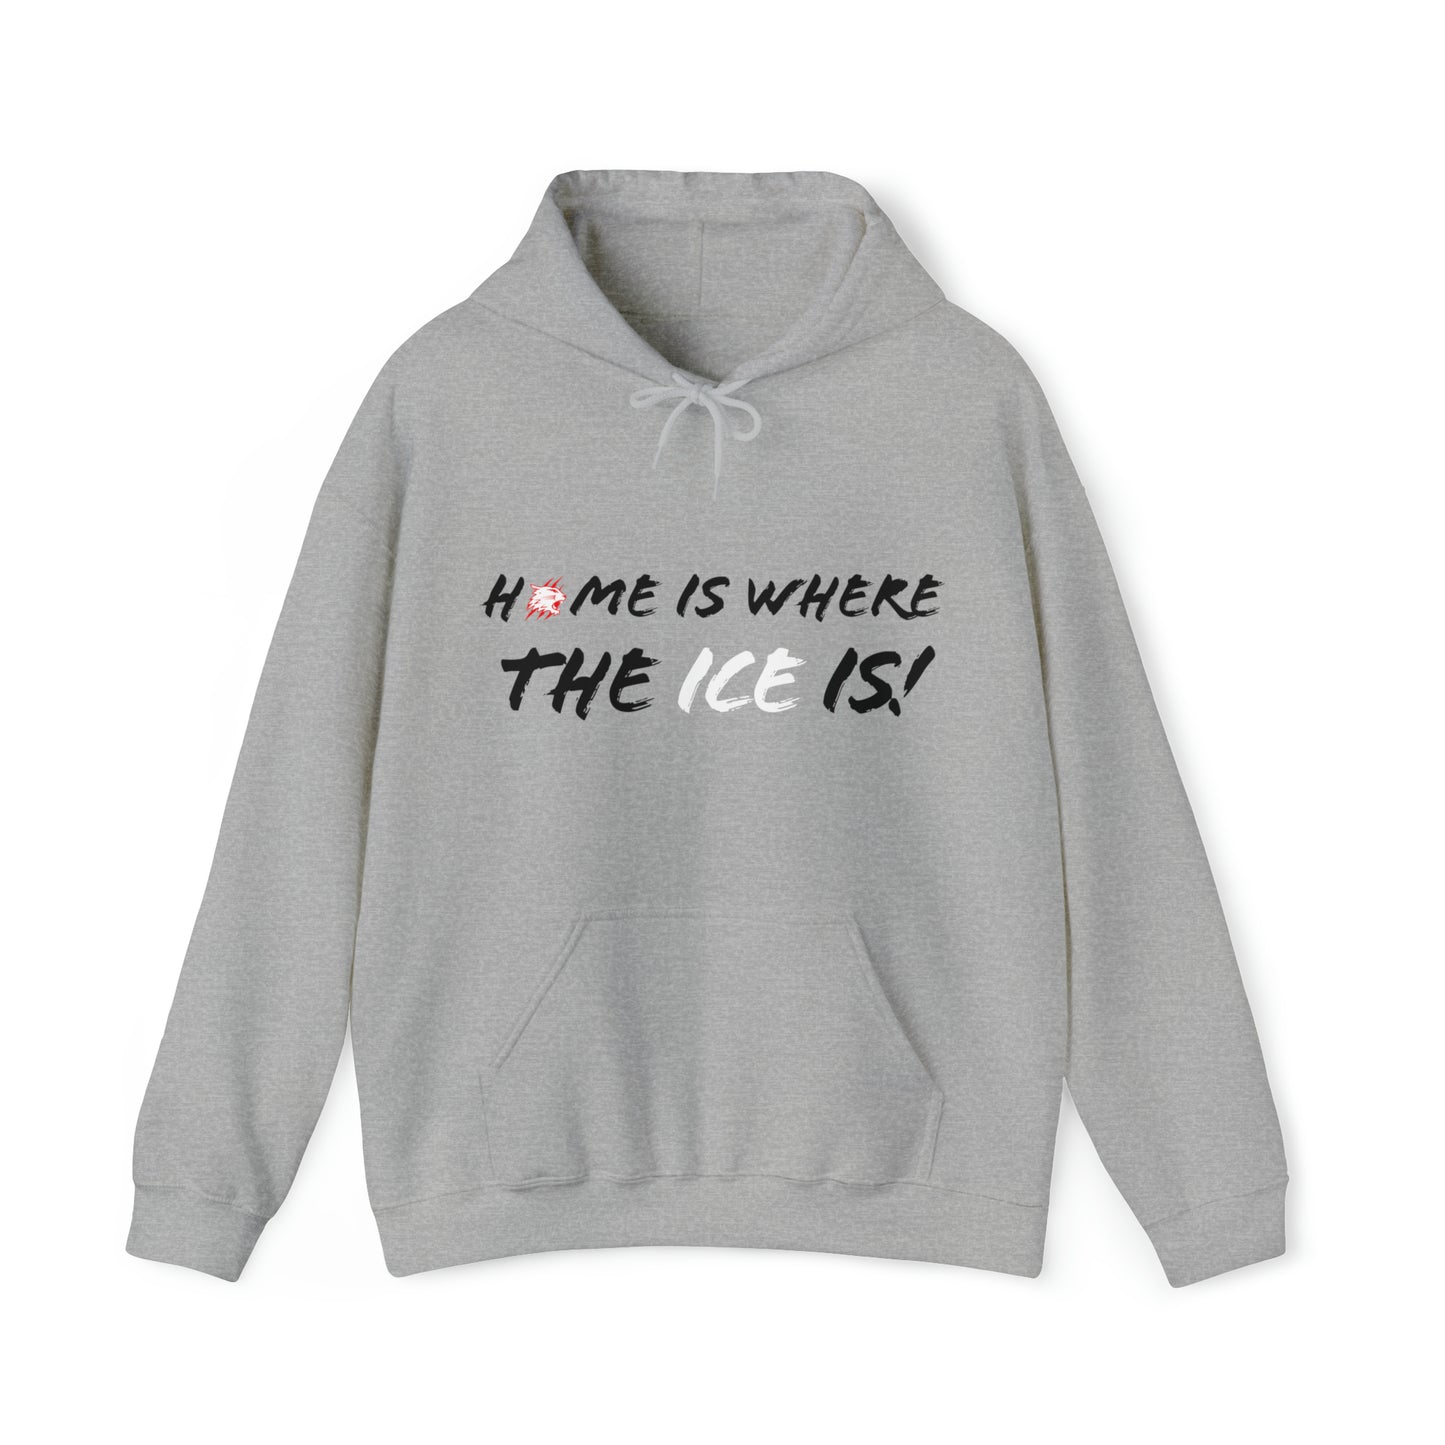 "Home is where the ice is" Hoody